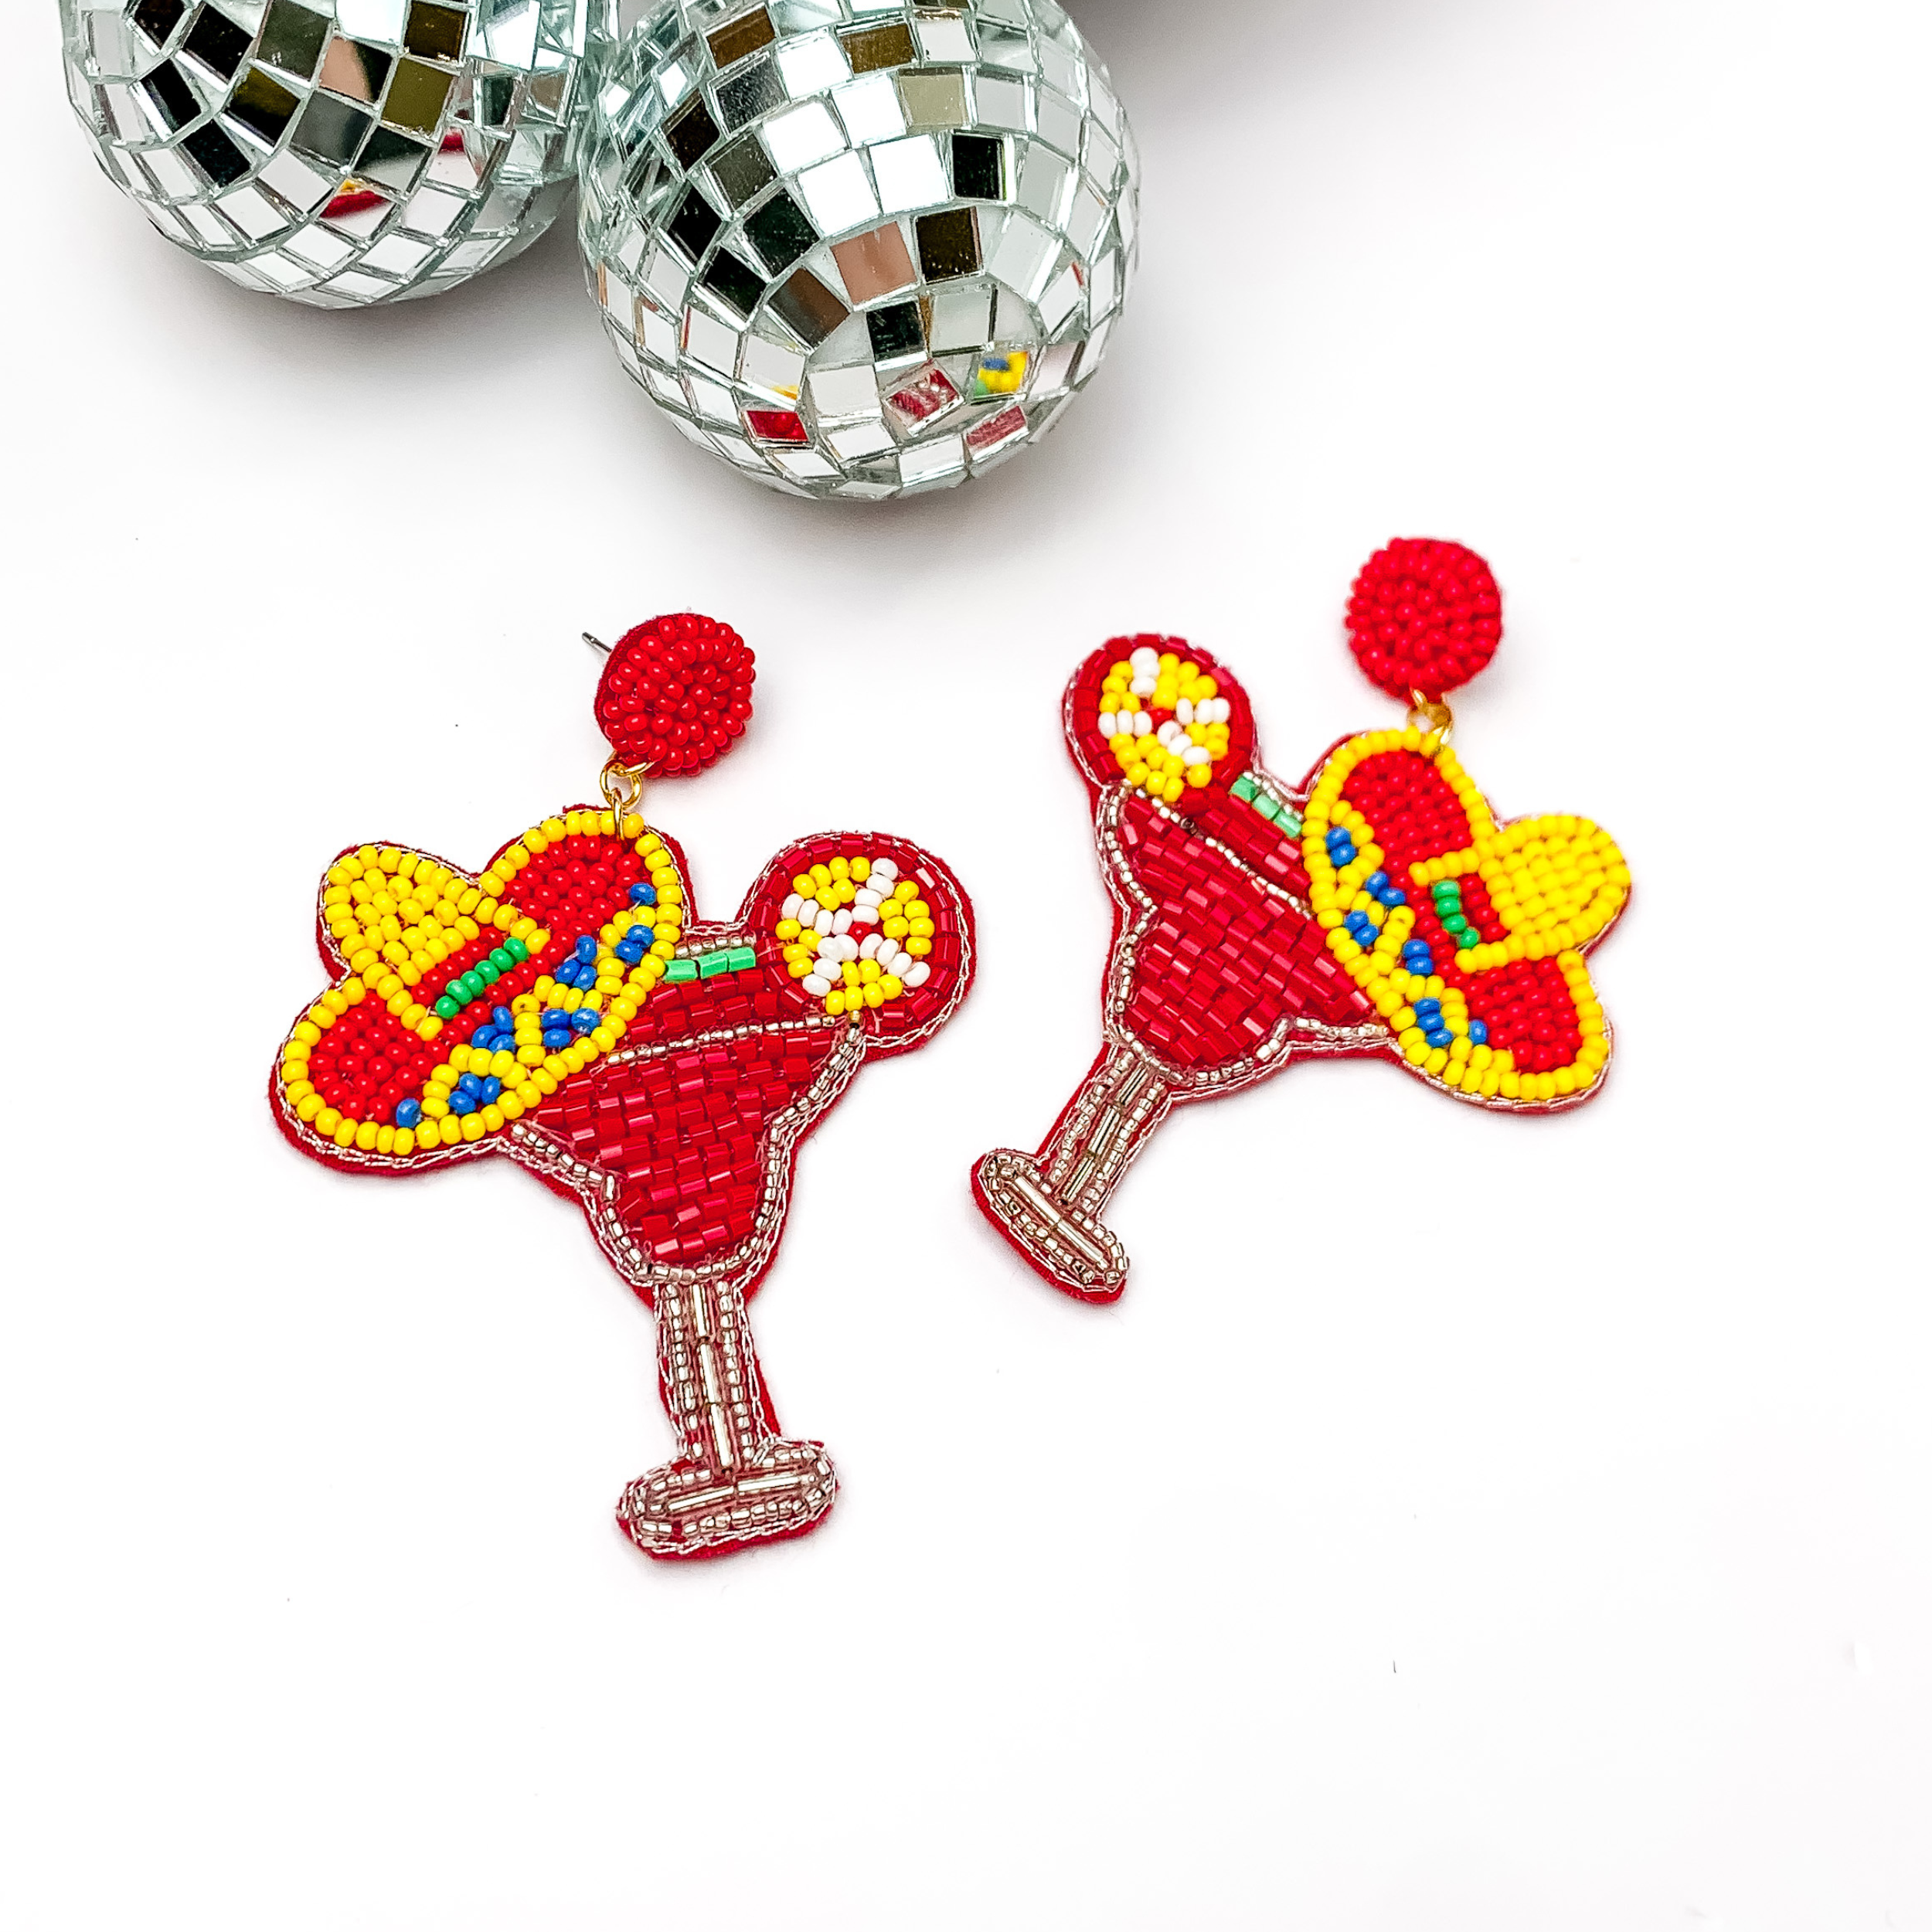 Margarita sombrero seed beaded drop earrings in red. The sombrero has yellow, dark blue, and red sequins. Taken in a white background with disco balls in the left corner.